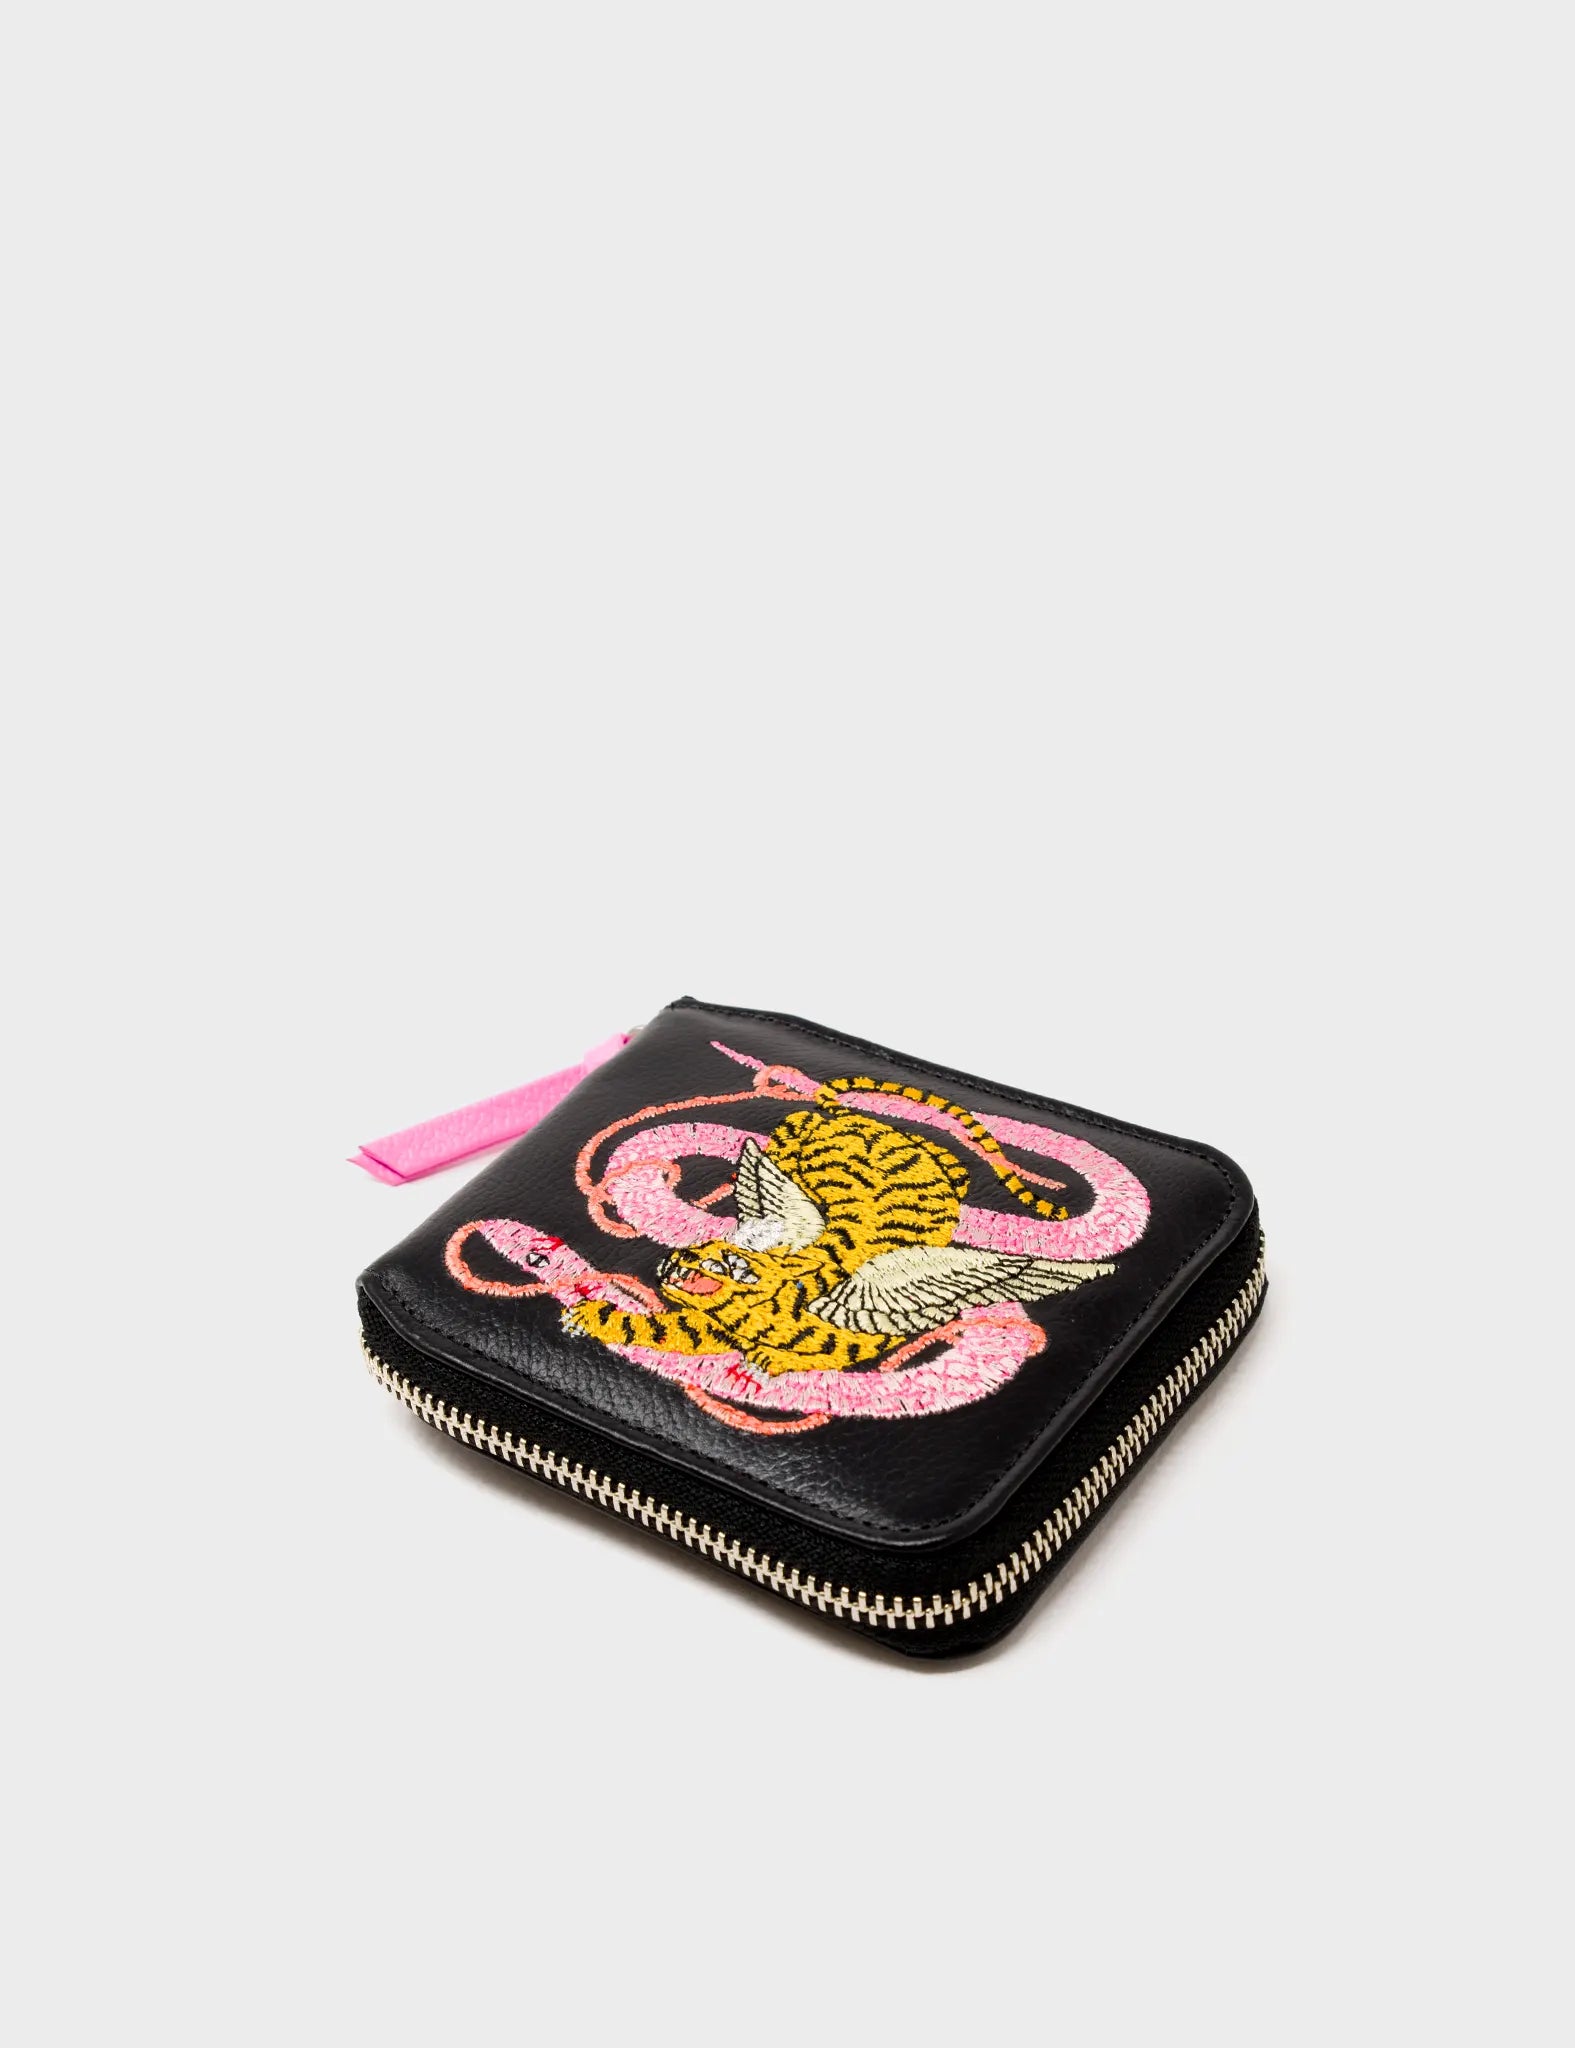 Black And Marigold Zip-around Leather Wallet - Tangle and Snake Embroidery